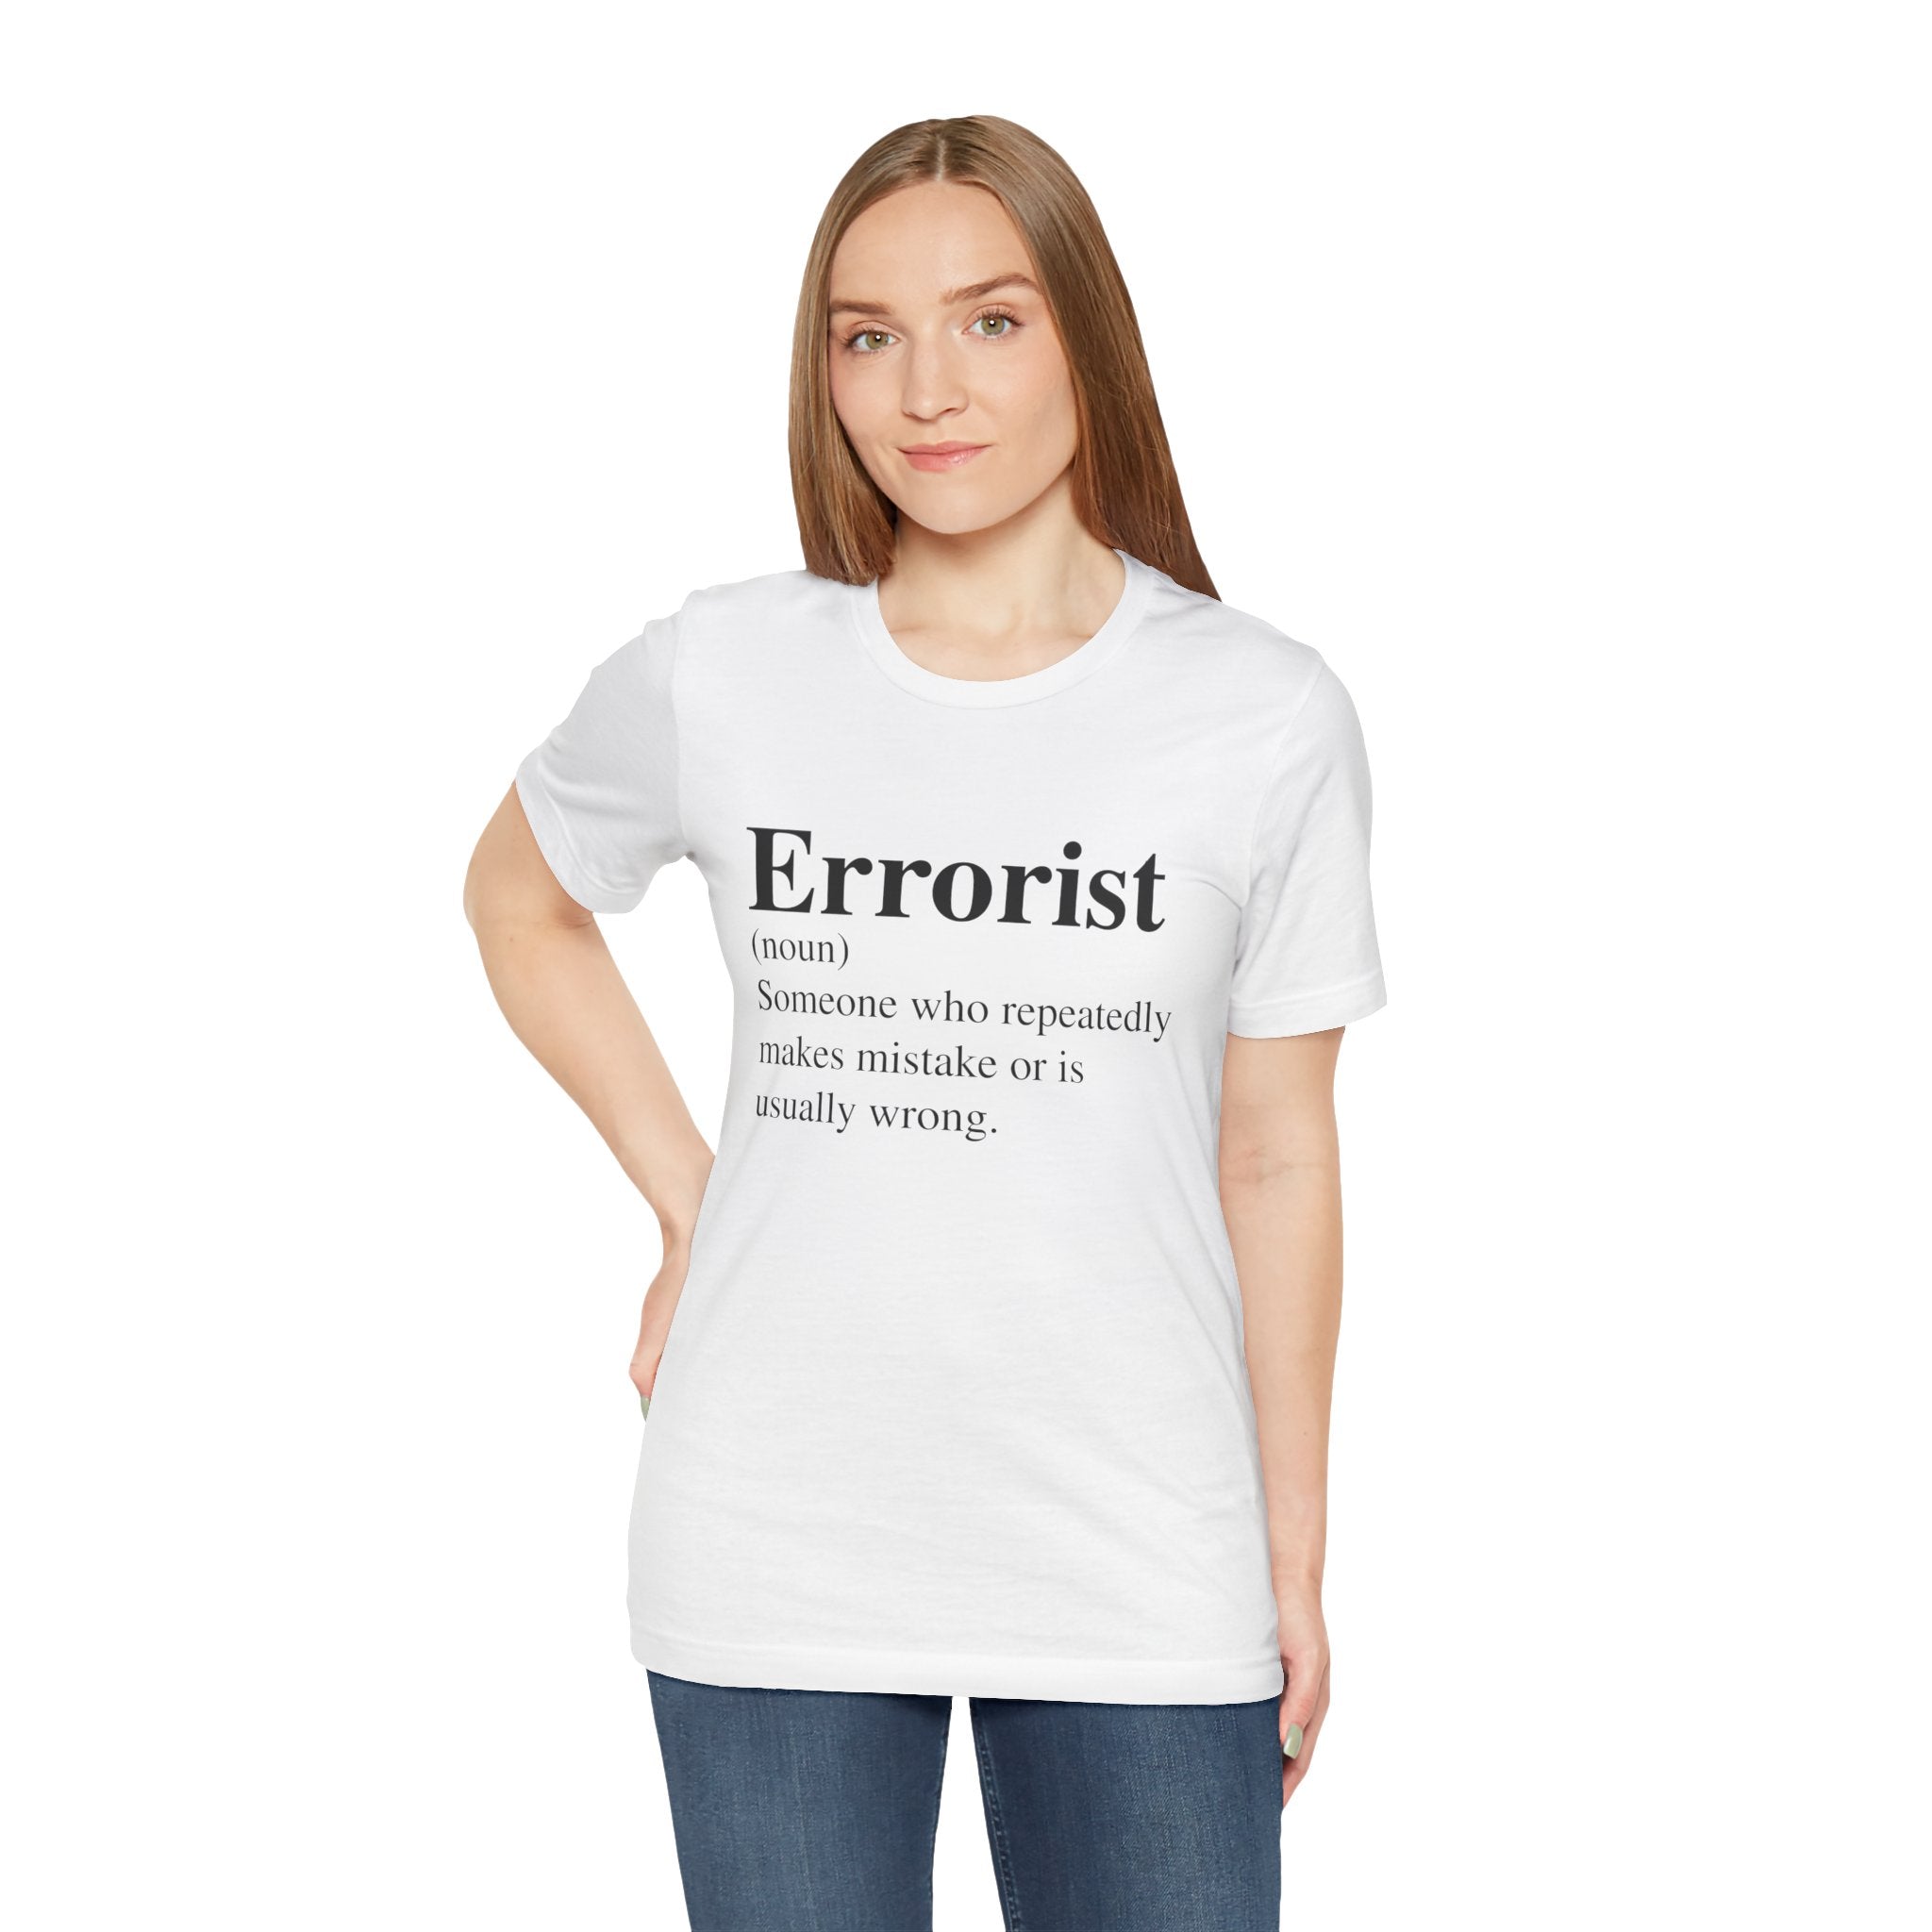 A woman with light brown hair wearing an Errorist T-Shirt with the text "errorist" and its definition printed on it.